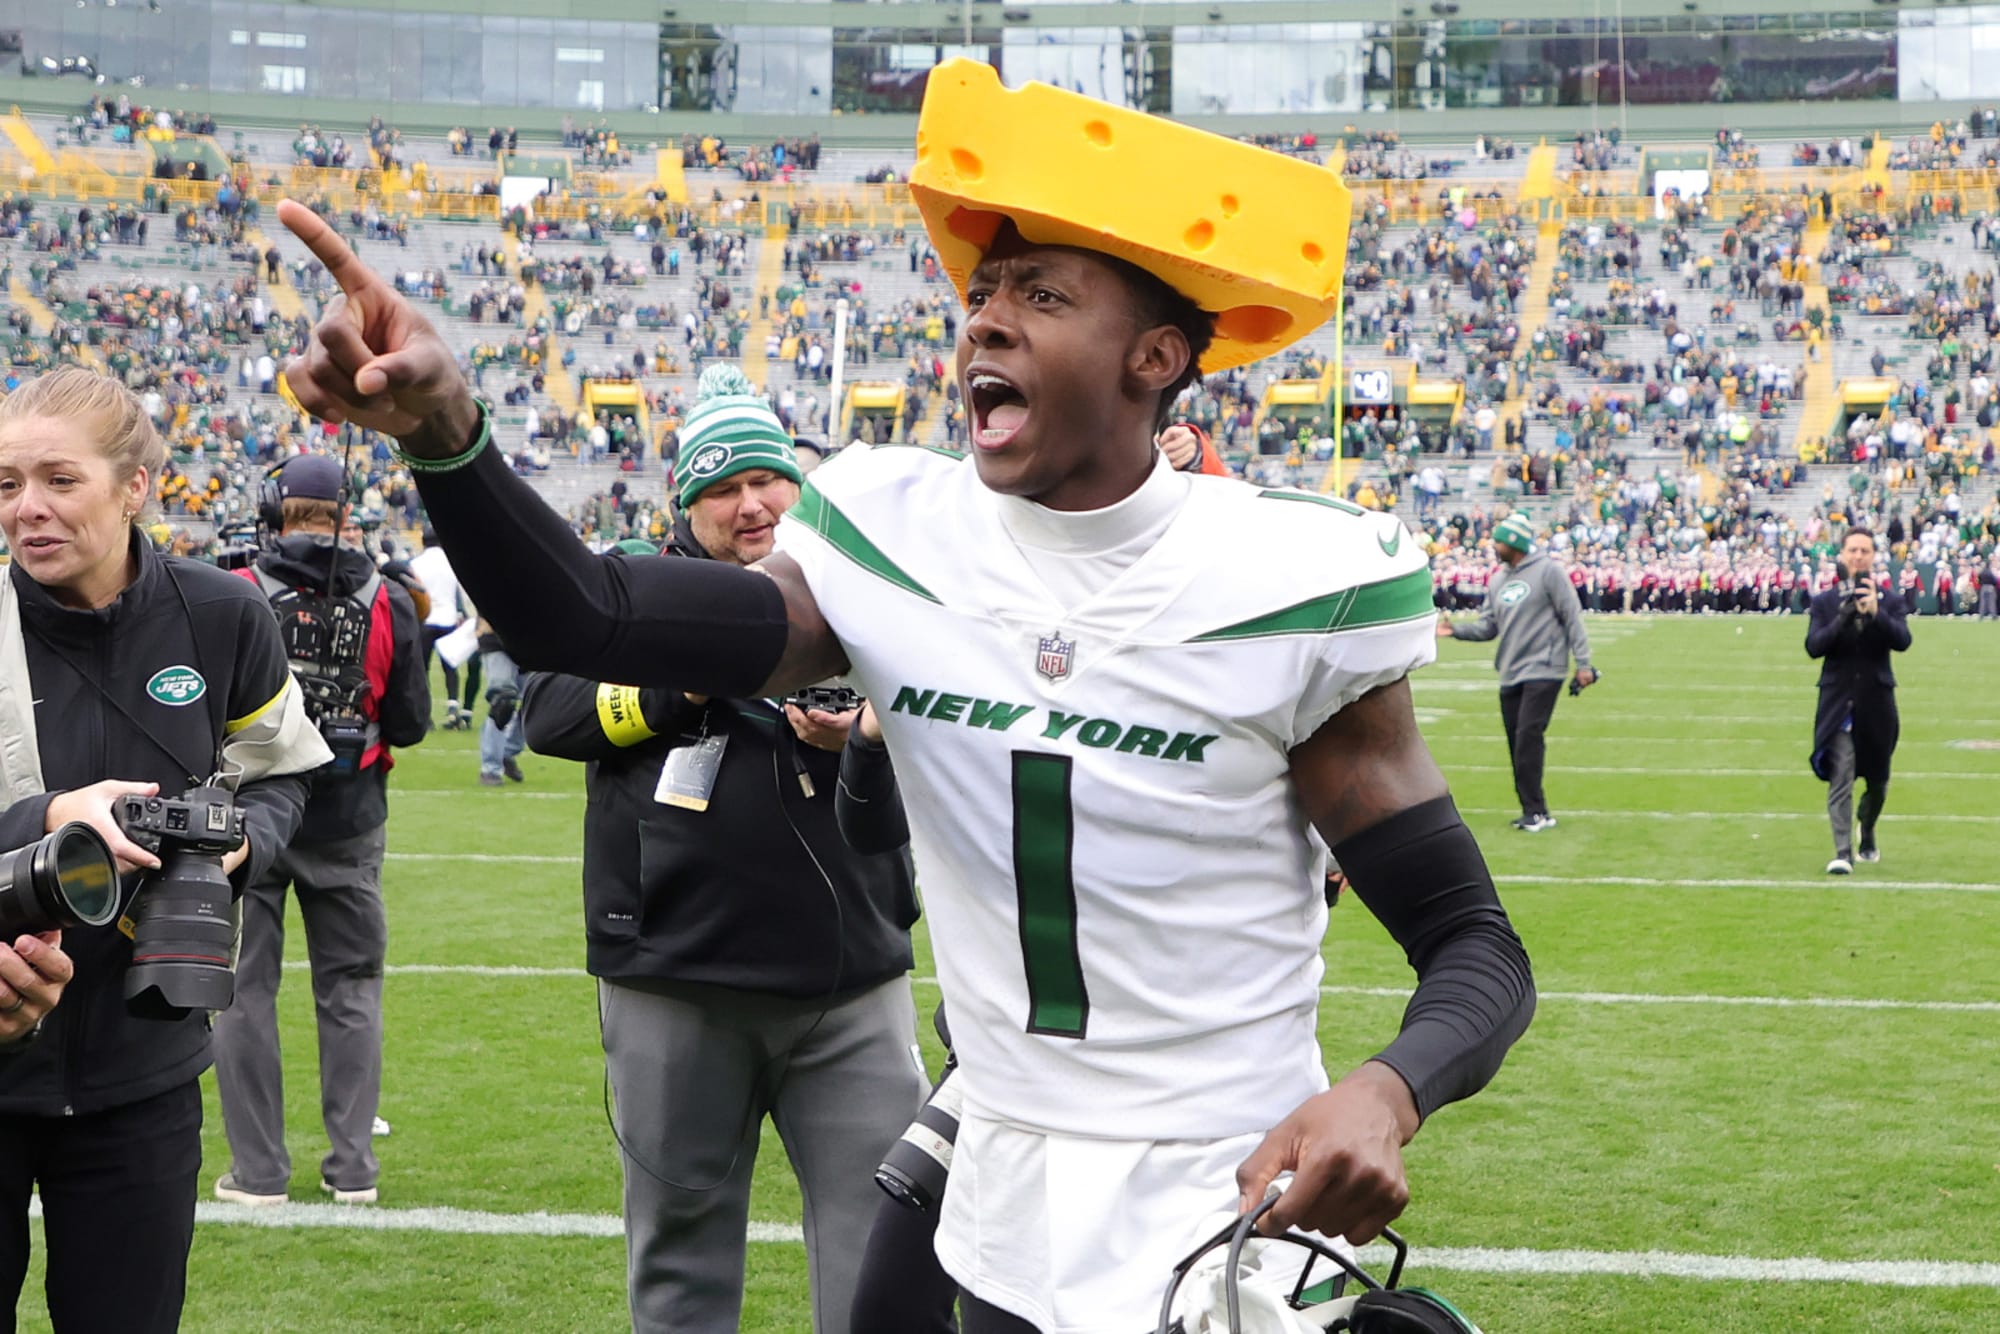 Photo of Jets defender finally burns cheesehead, sending SOS signal to Aaron Rodgers